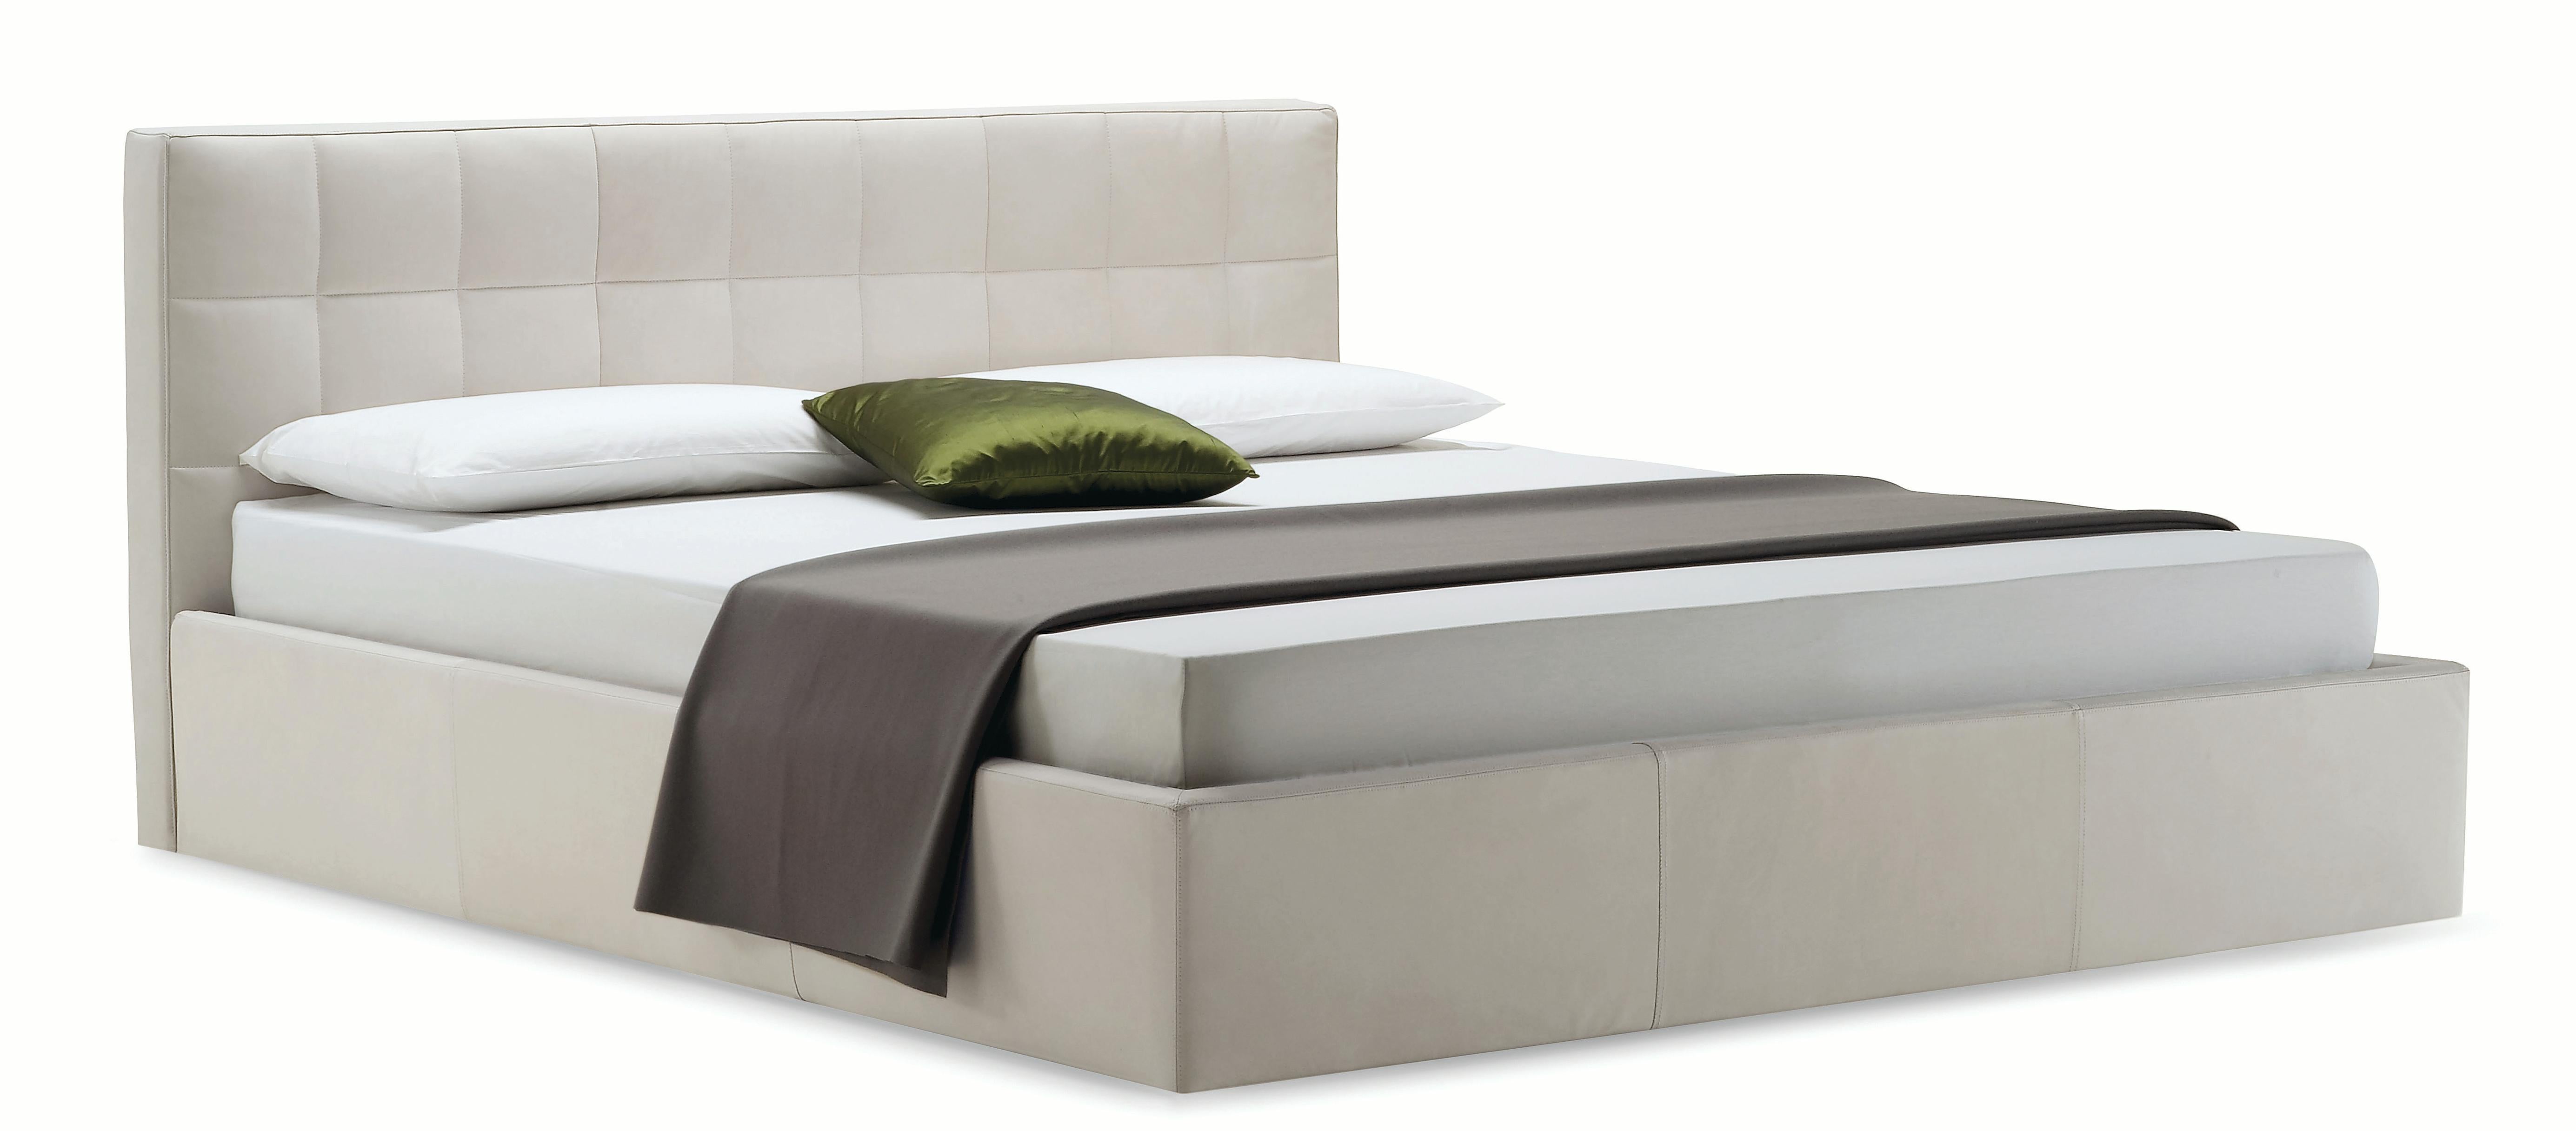 Zanotta Large Box Bed with Container Unit in White Upholstery with Steel Frame by Emaf Progetti

Bed with container unit. Steel frame, varnished aluminium. Suspension in natural bent beech strips, with stiffness adjusters, inserted in nylon